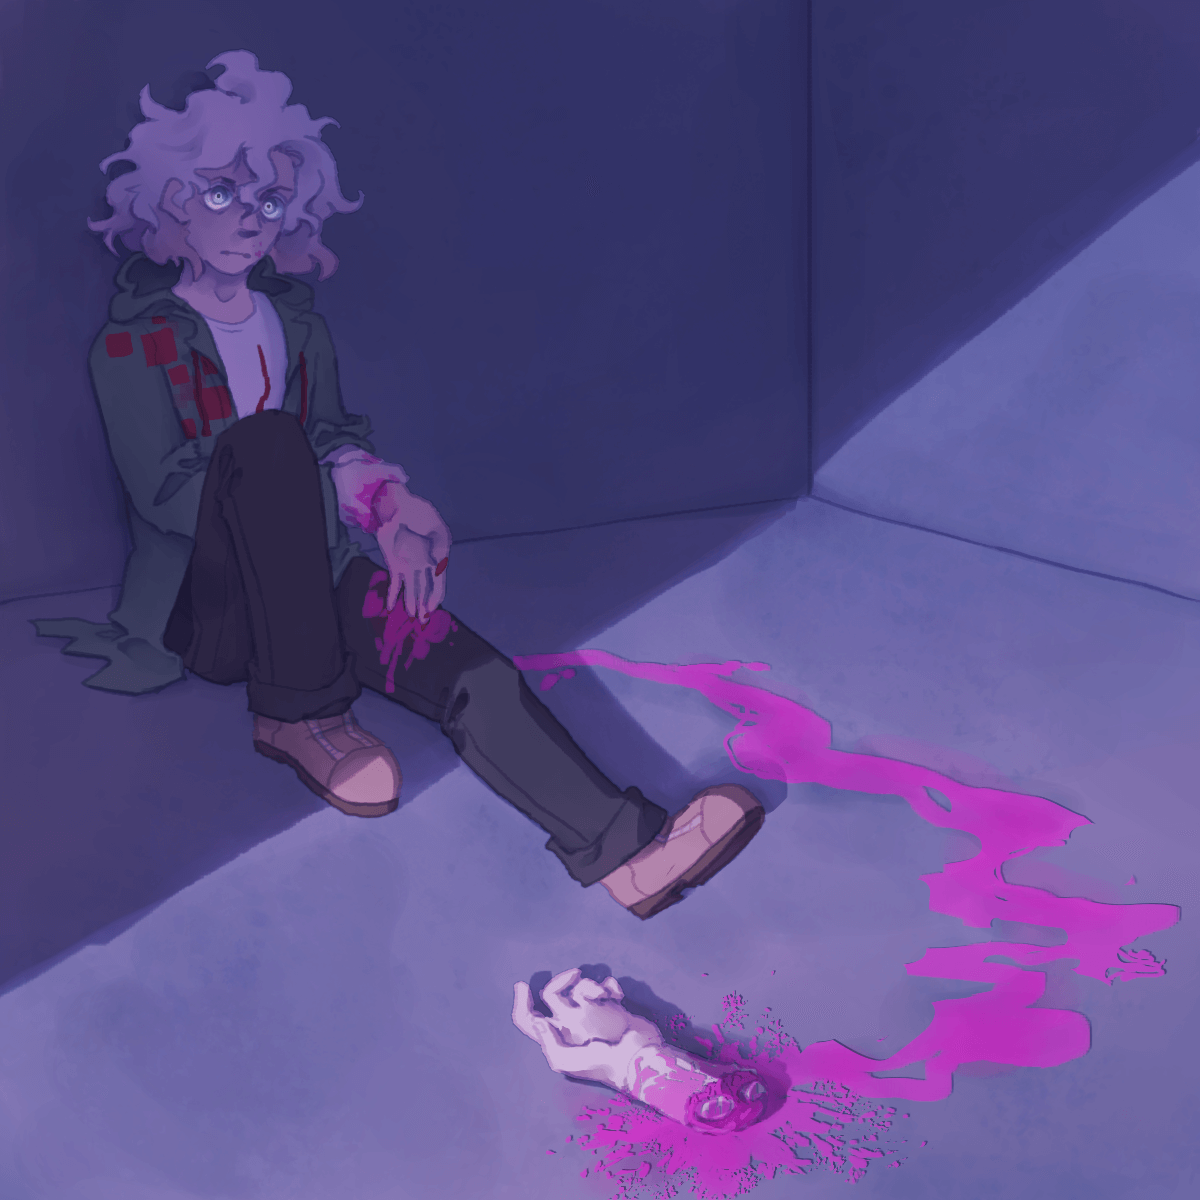 a drawing of nagito. he is sitting in a dark bare room, clutching junko's hand
		attached to his arm. a trail of blood leads to his own severed hand lying on the floor.